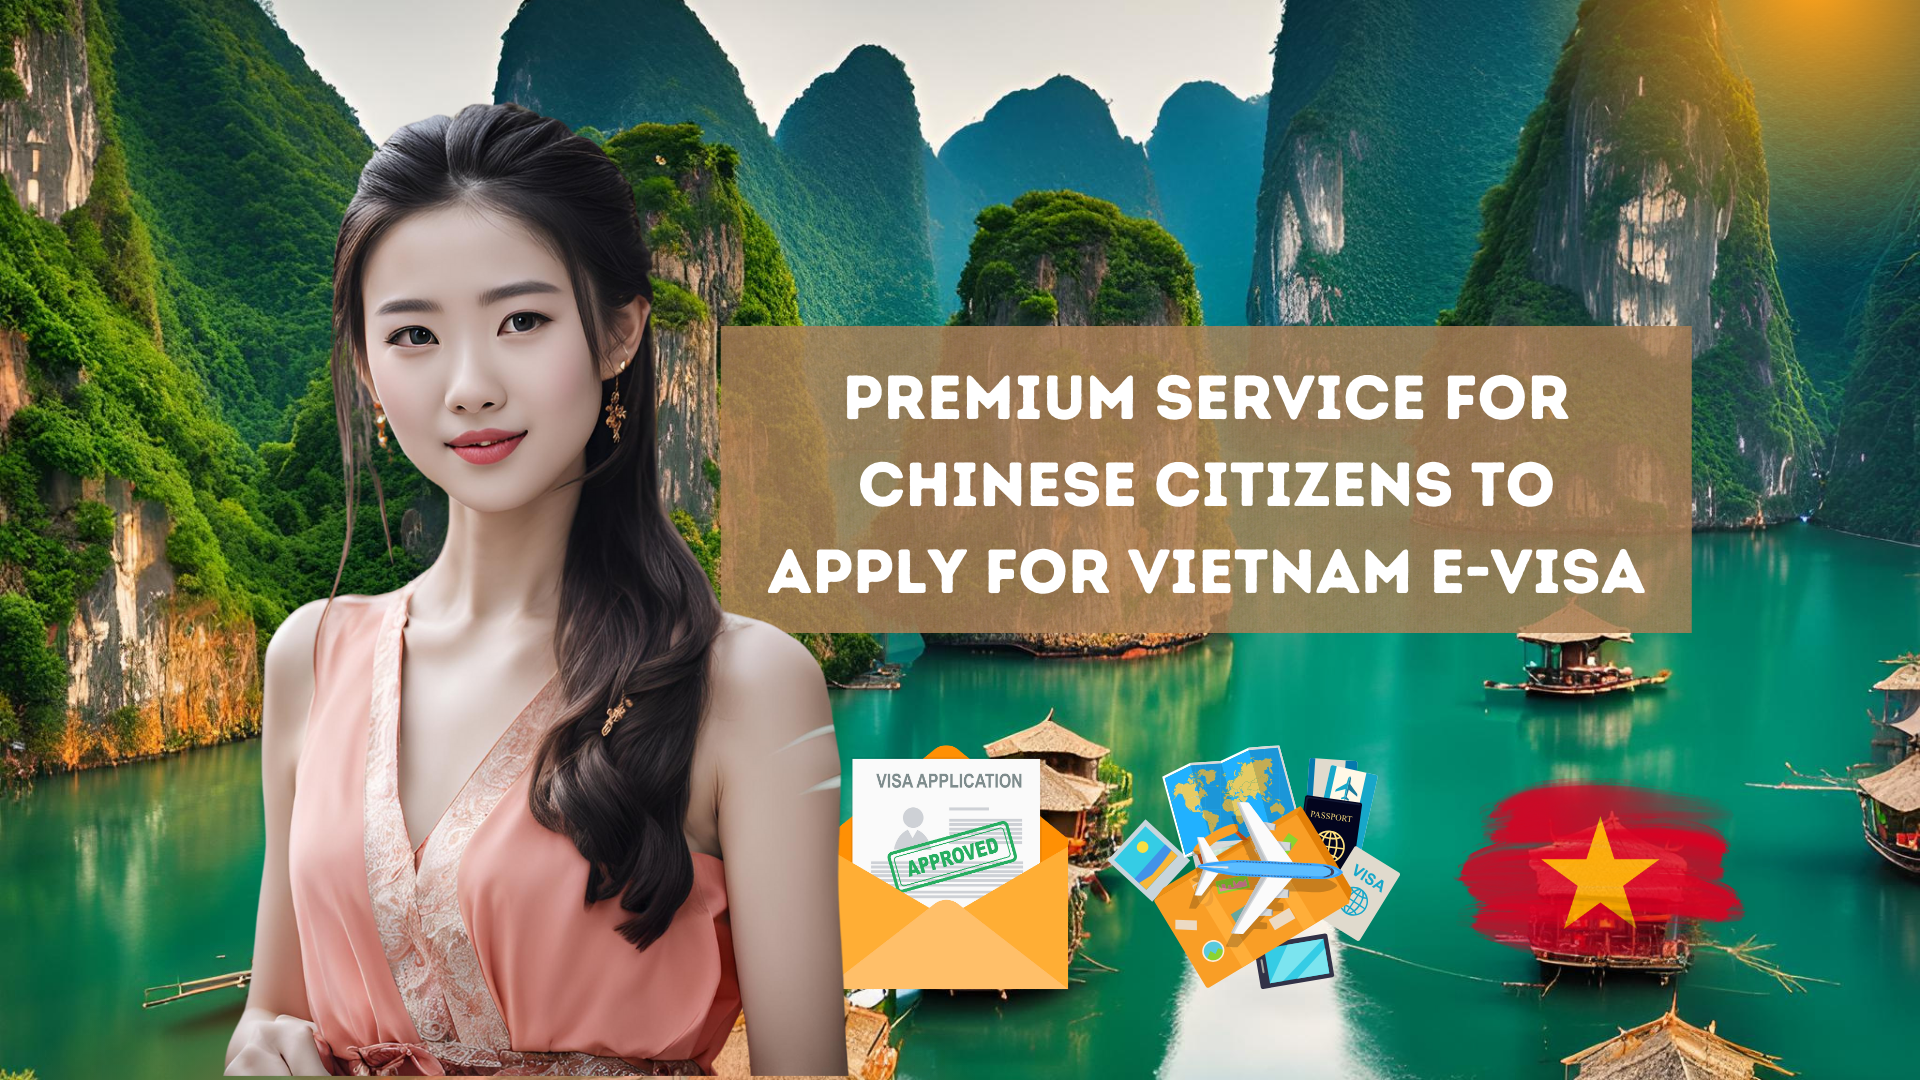 Premium service for Chinese citizens to apply for Vietnam e-visa